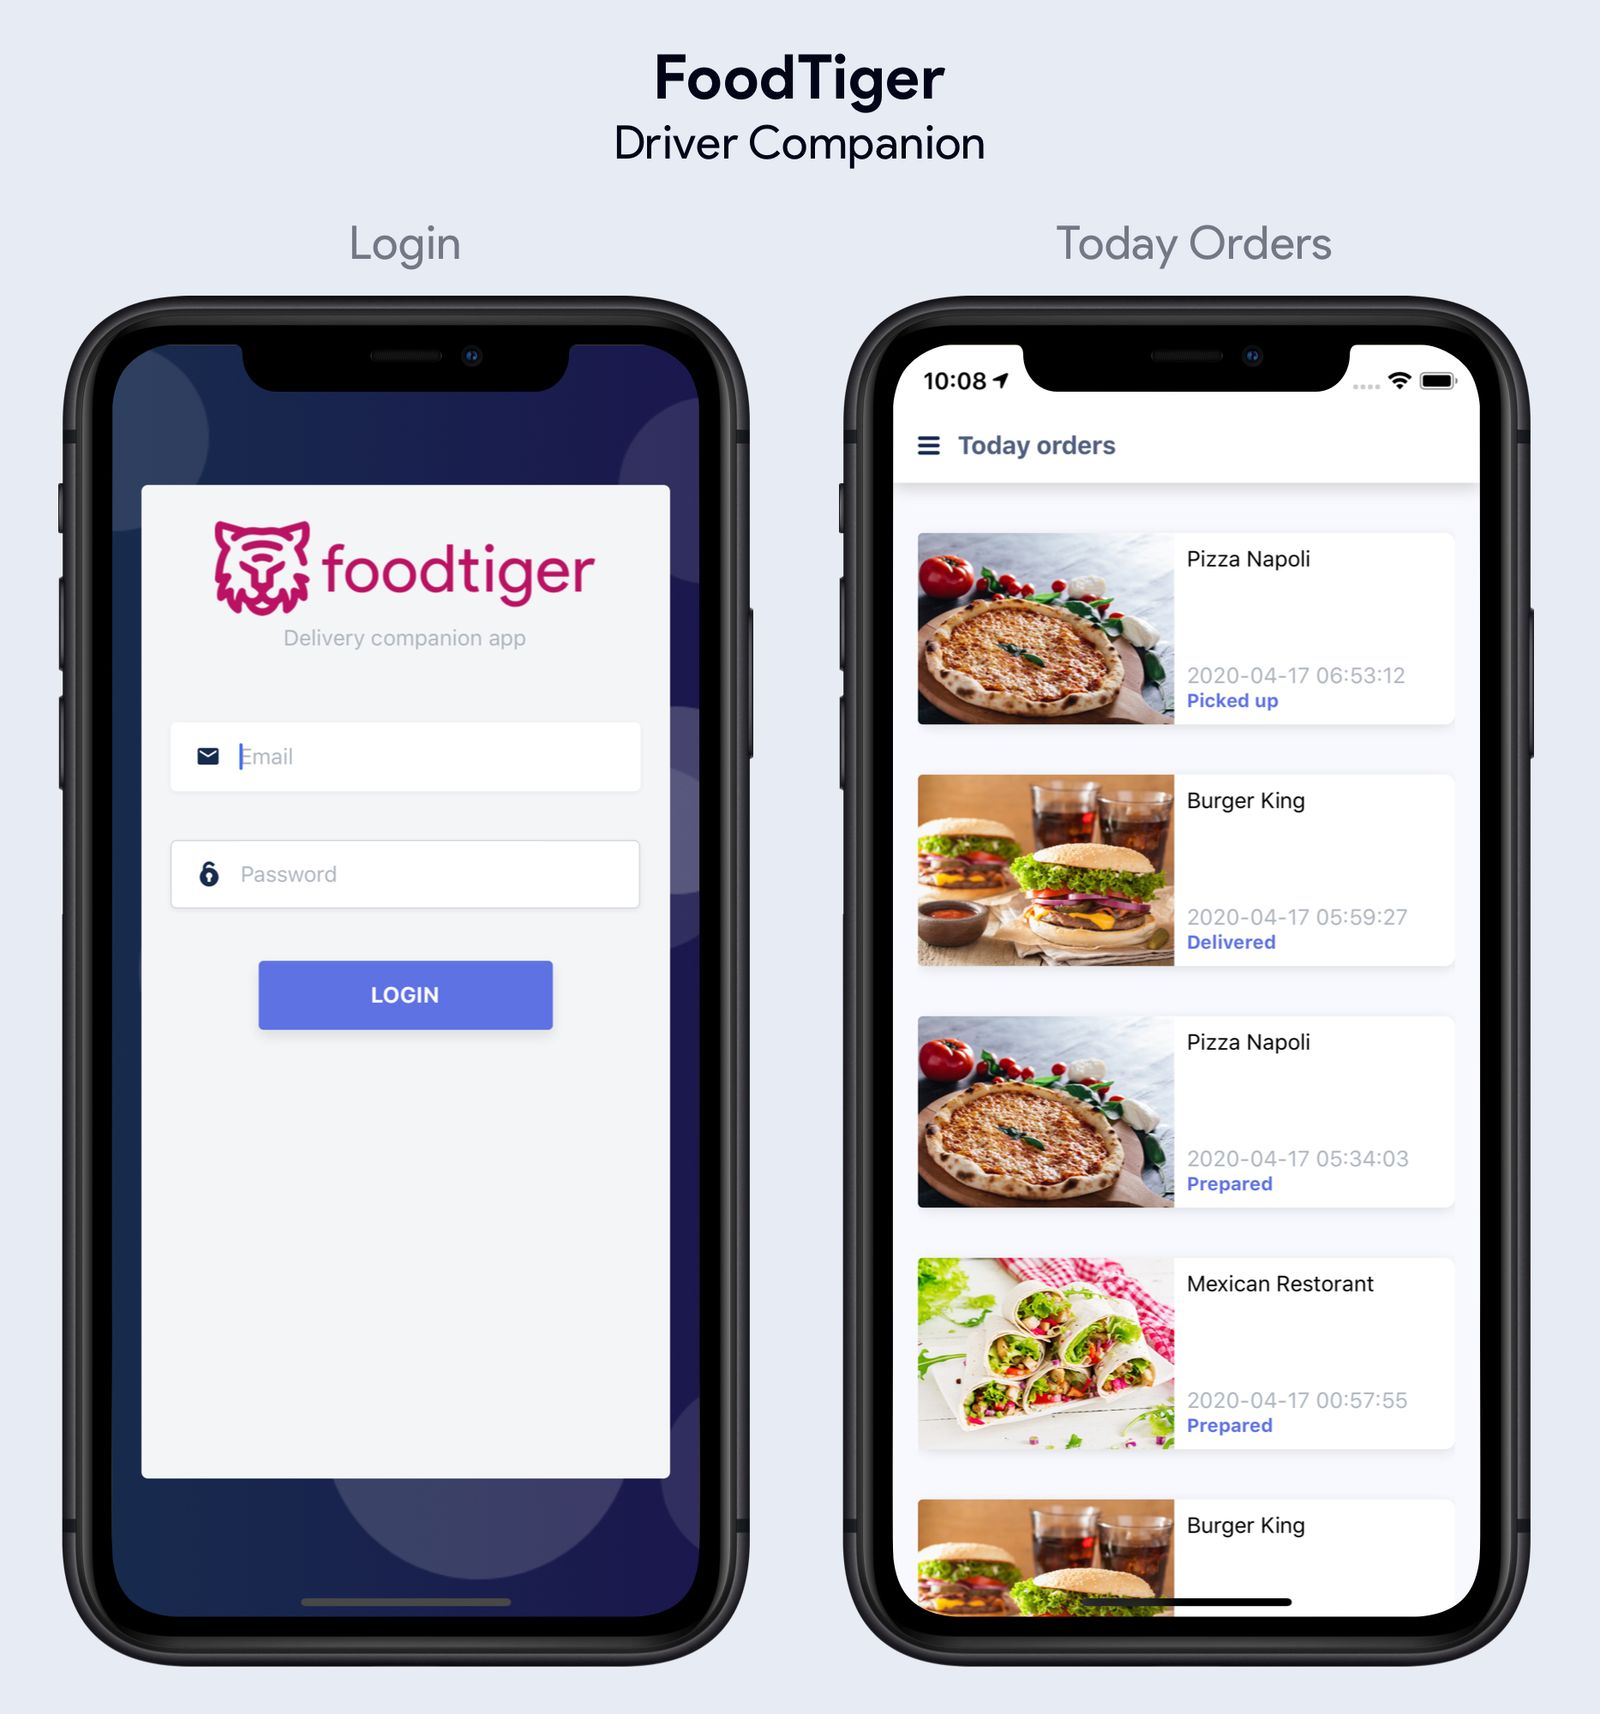 Driver Companion App for FoodTiger Delivery - 5